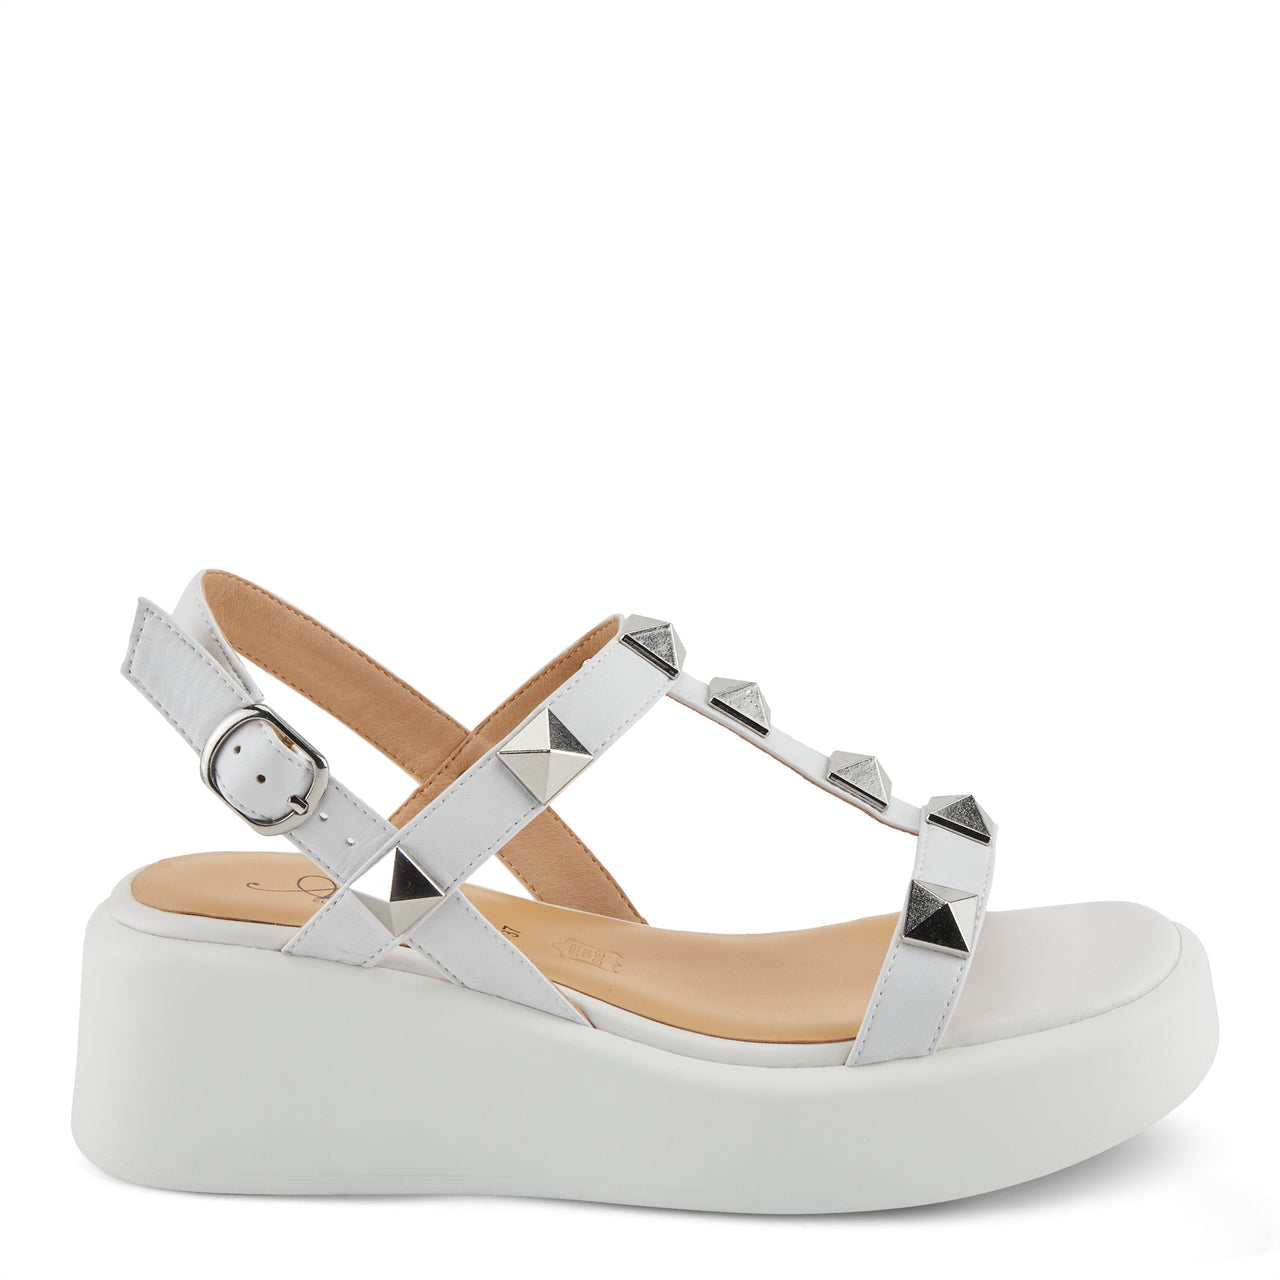 Spring Step Shoes Azura Boogierock Sandals - Women's stylish and comfortable leather sandals with cushioned footbed and adjustable straps for the perfect fit